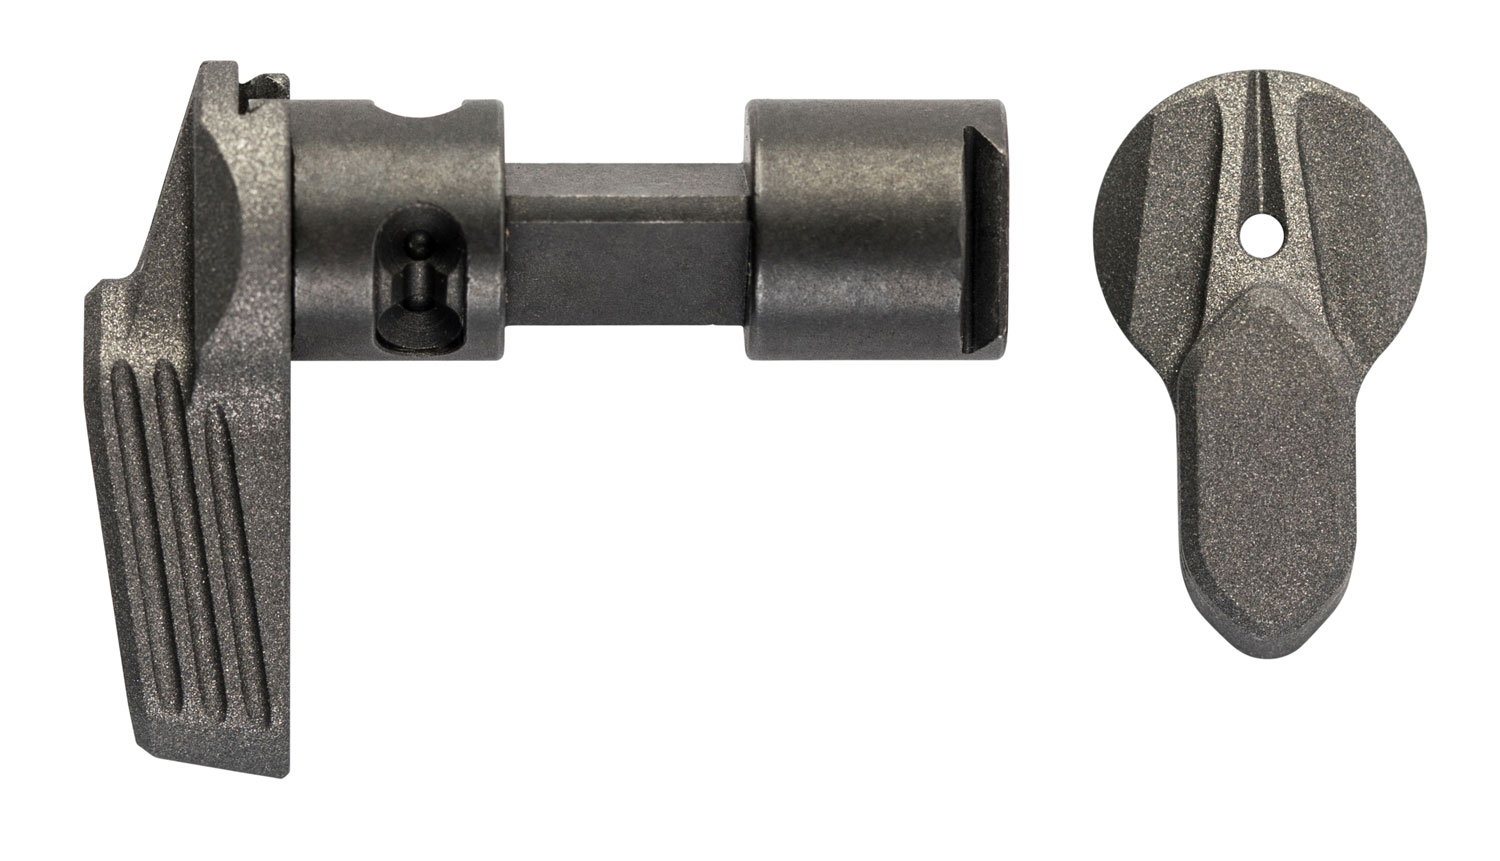 RADIAN TALON SAFETY SELECTOR 2-LEVER TUNGSTEN GREY FOR AR15